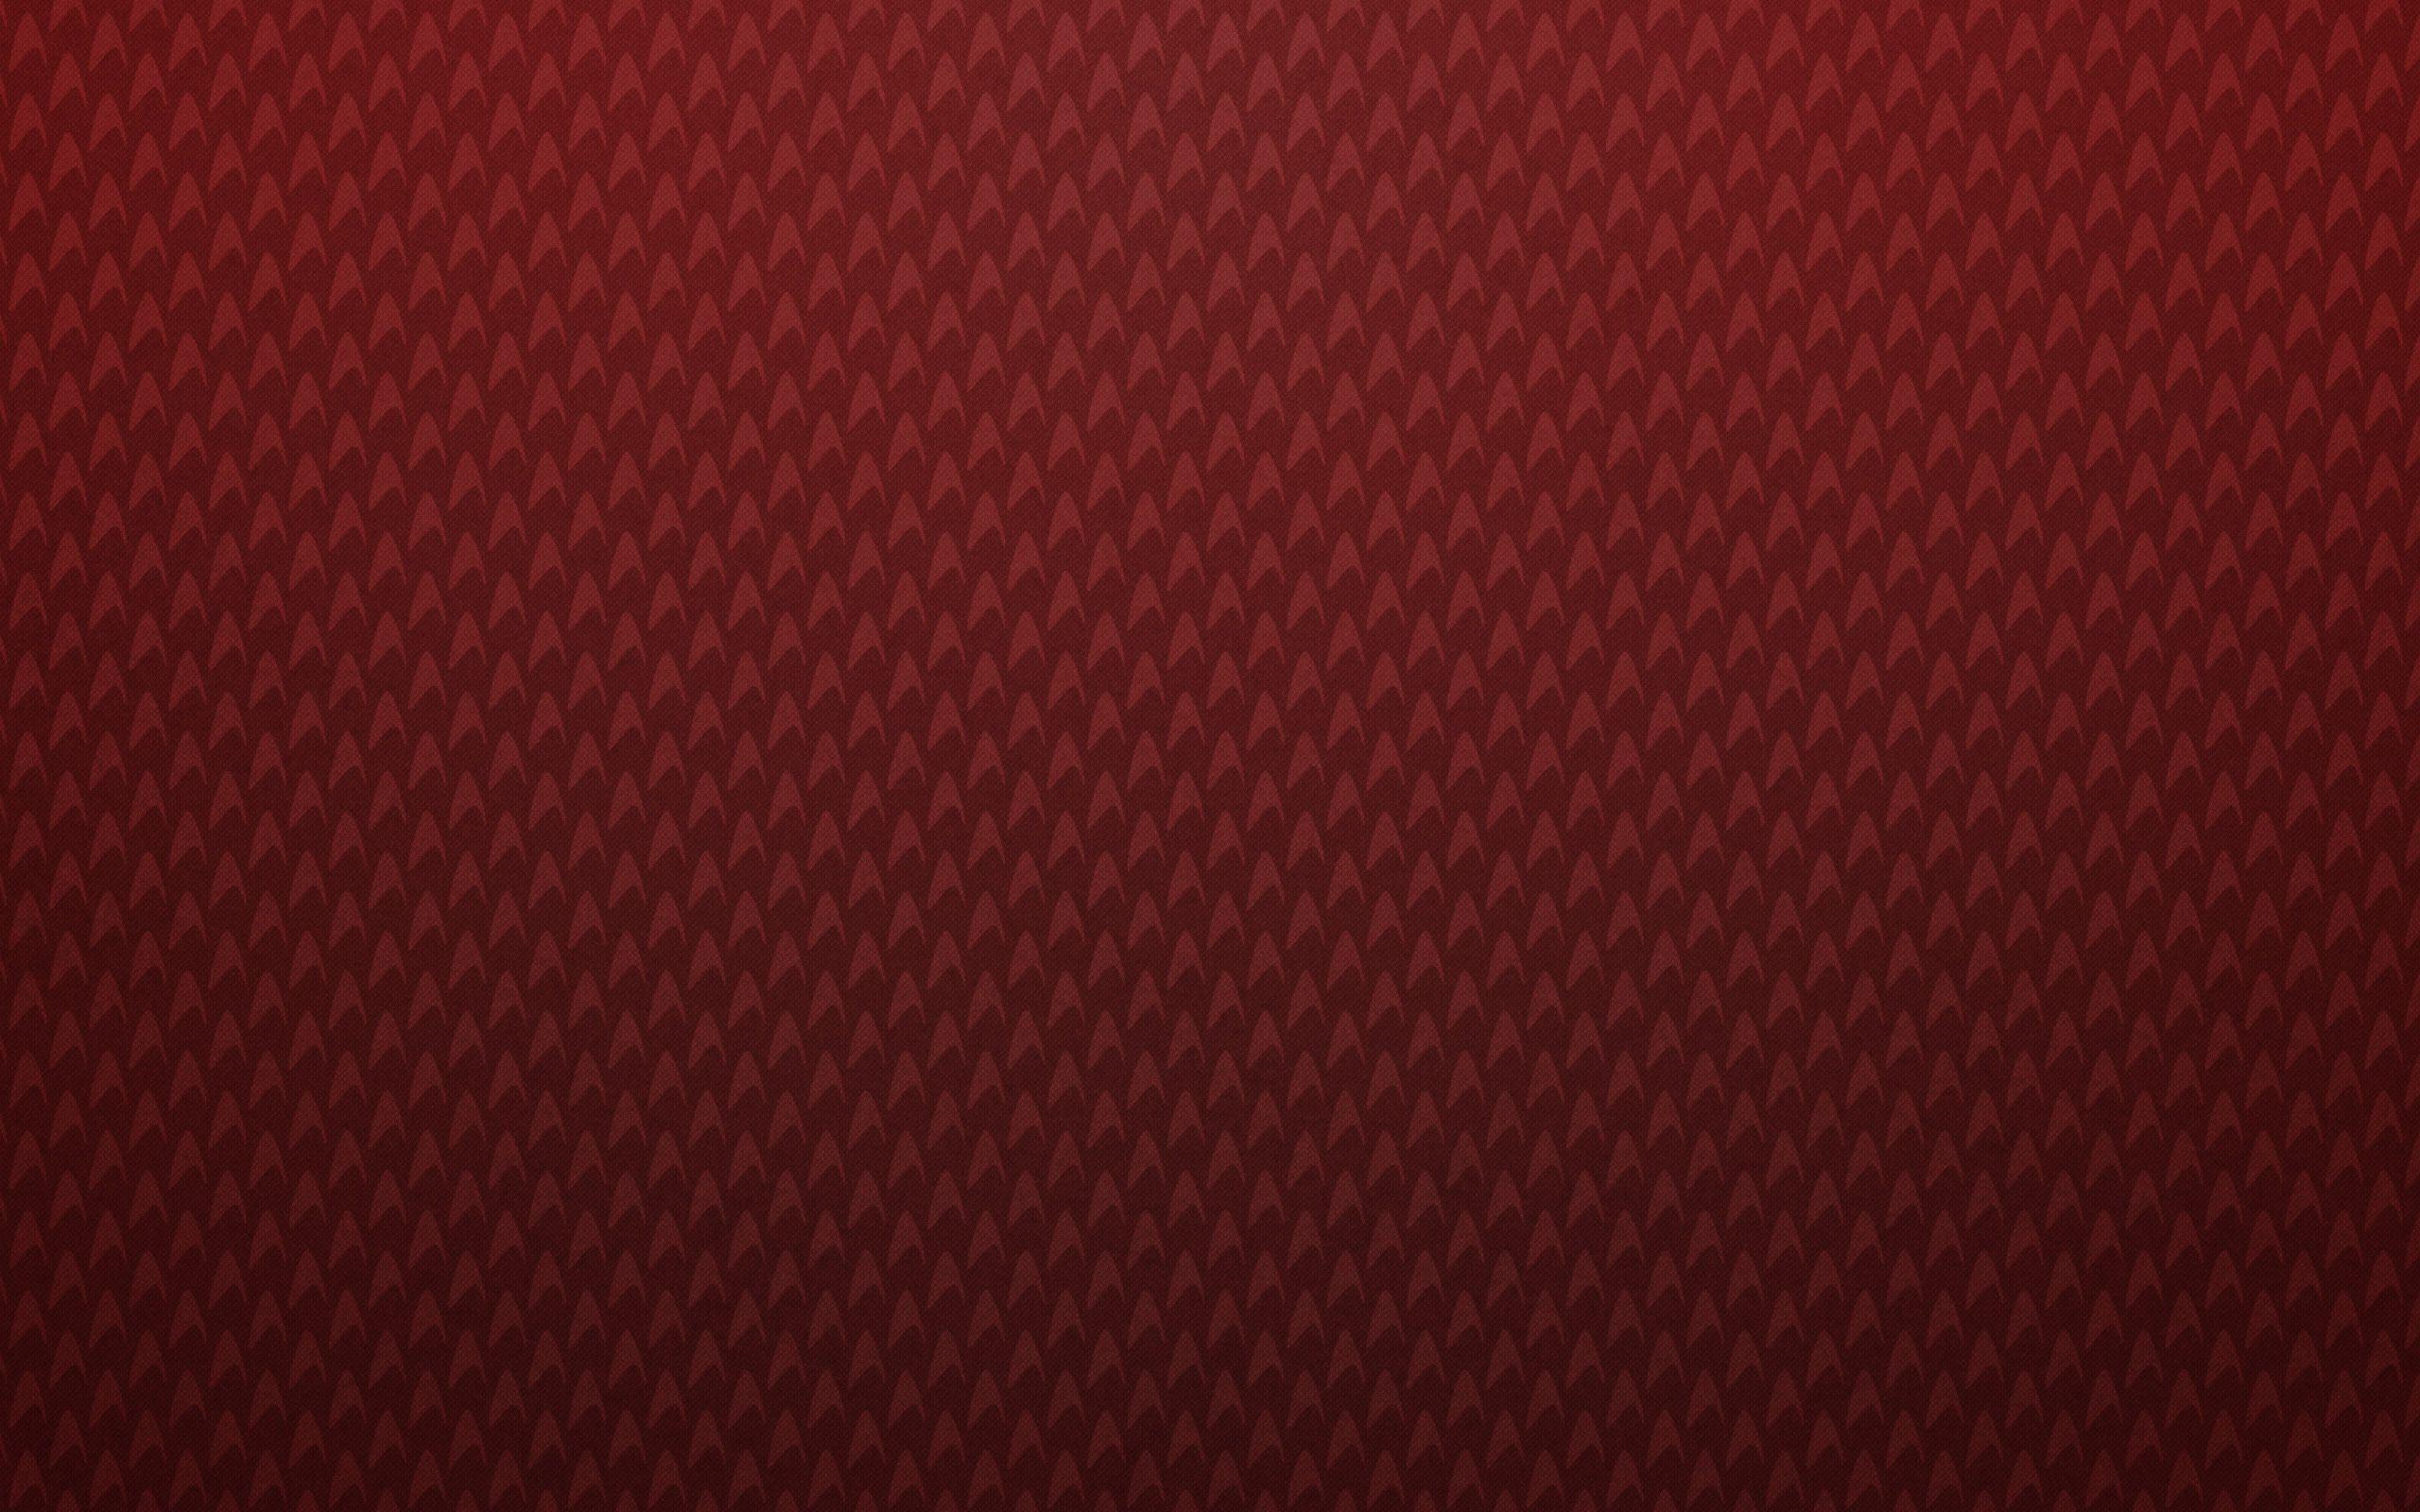 Red Texture Background Images HD Pictures and Wallpaper For Free Download   Pngtree